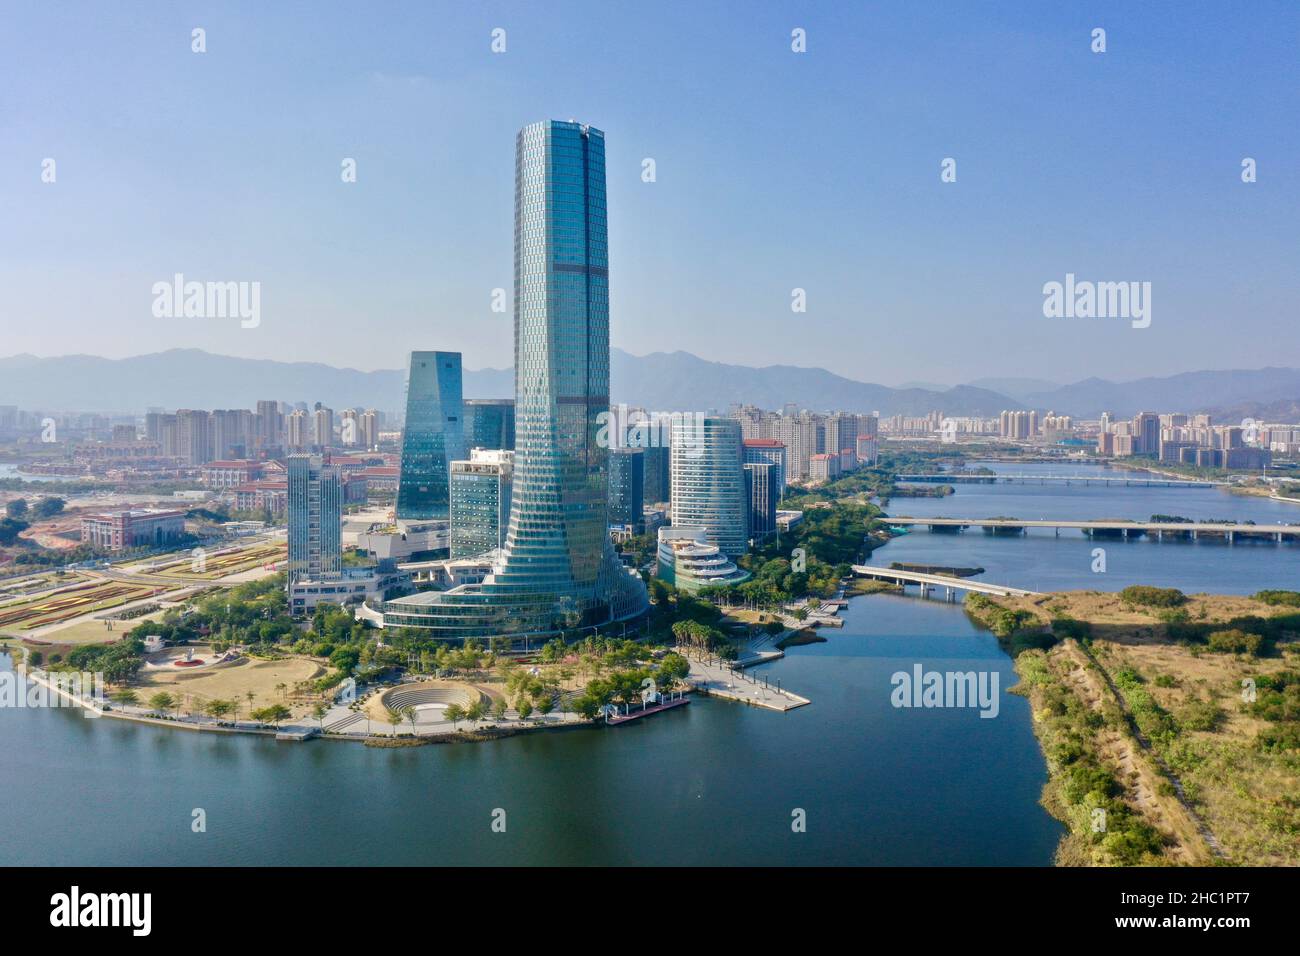 (211221) -- XIAMEN, Dec. 21, 2021 (Xinhua) -- Aerial photo taken on Dec. 8, 2021 shows the city view of Xiamen, southeast China's Fujian Province. This year marks the 40th anniversary of the establishment of the Xiamen Special Economic Zone (SEZ). The Xiamen SEZ has made important contributions to the country's reform, opening up, and socialist modernization, and played a unique role in promoting national reunification. (Xinhua/Jiang Kehong) Stock Photo